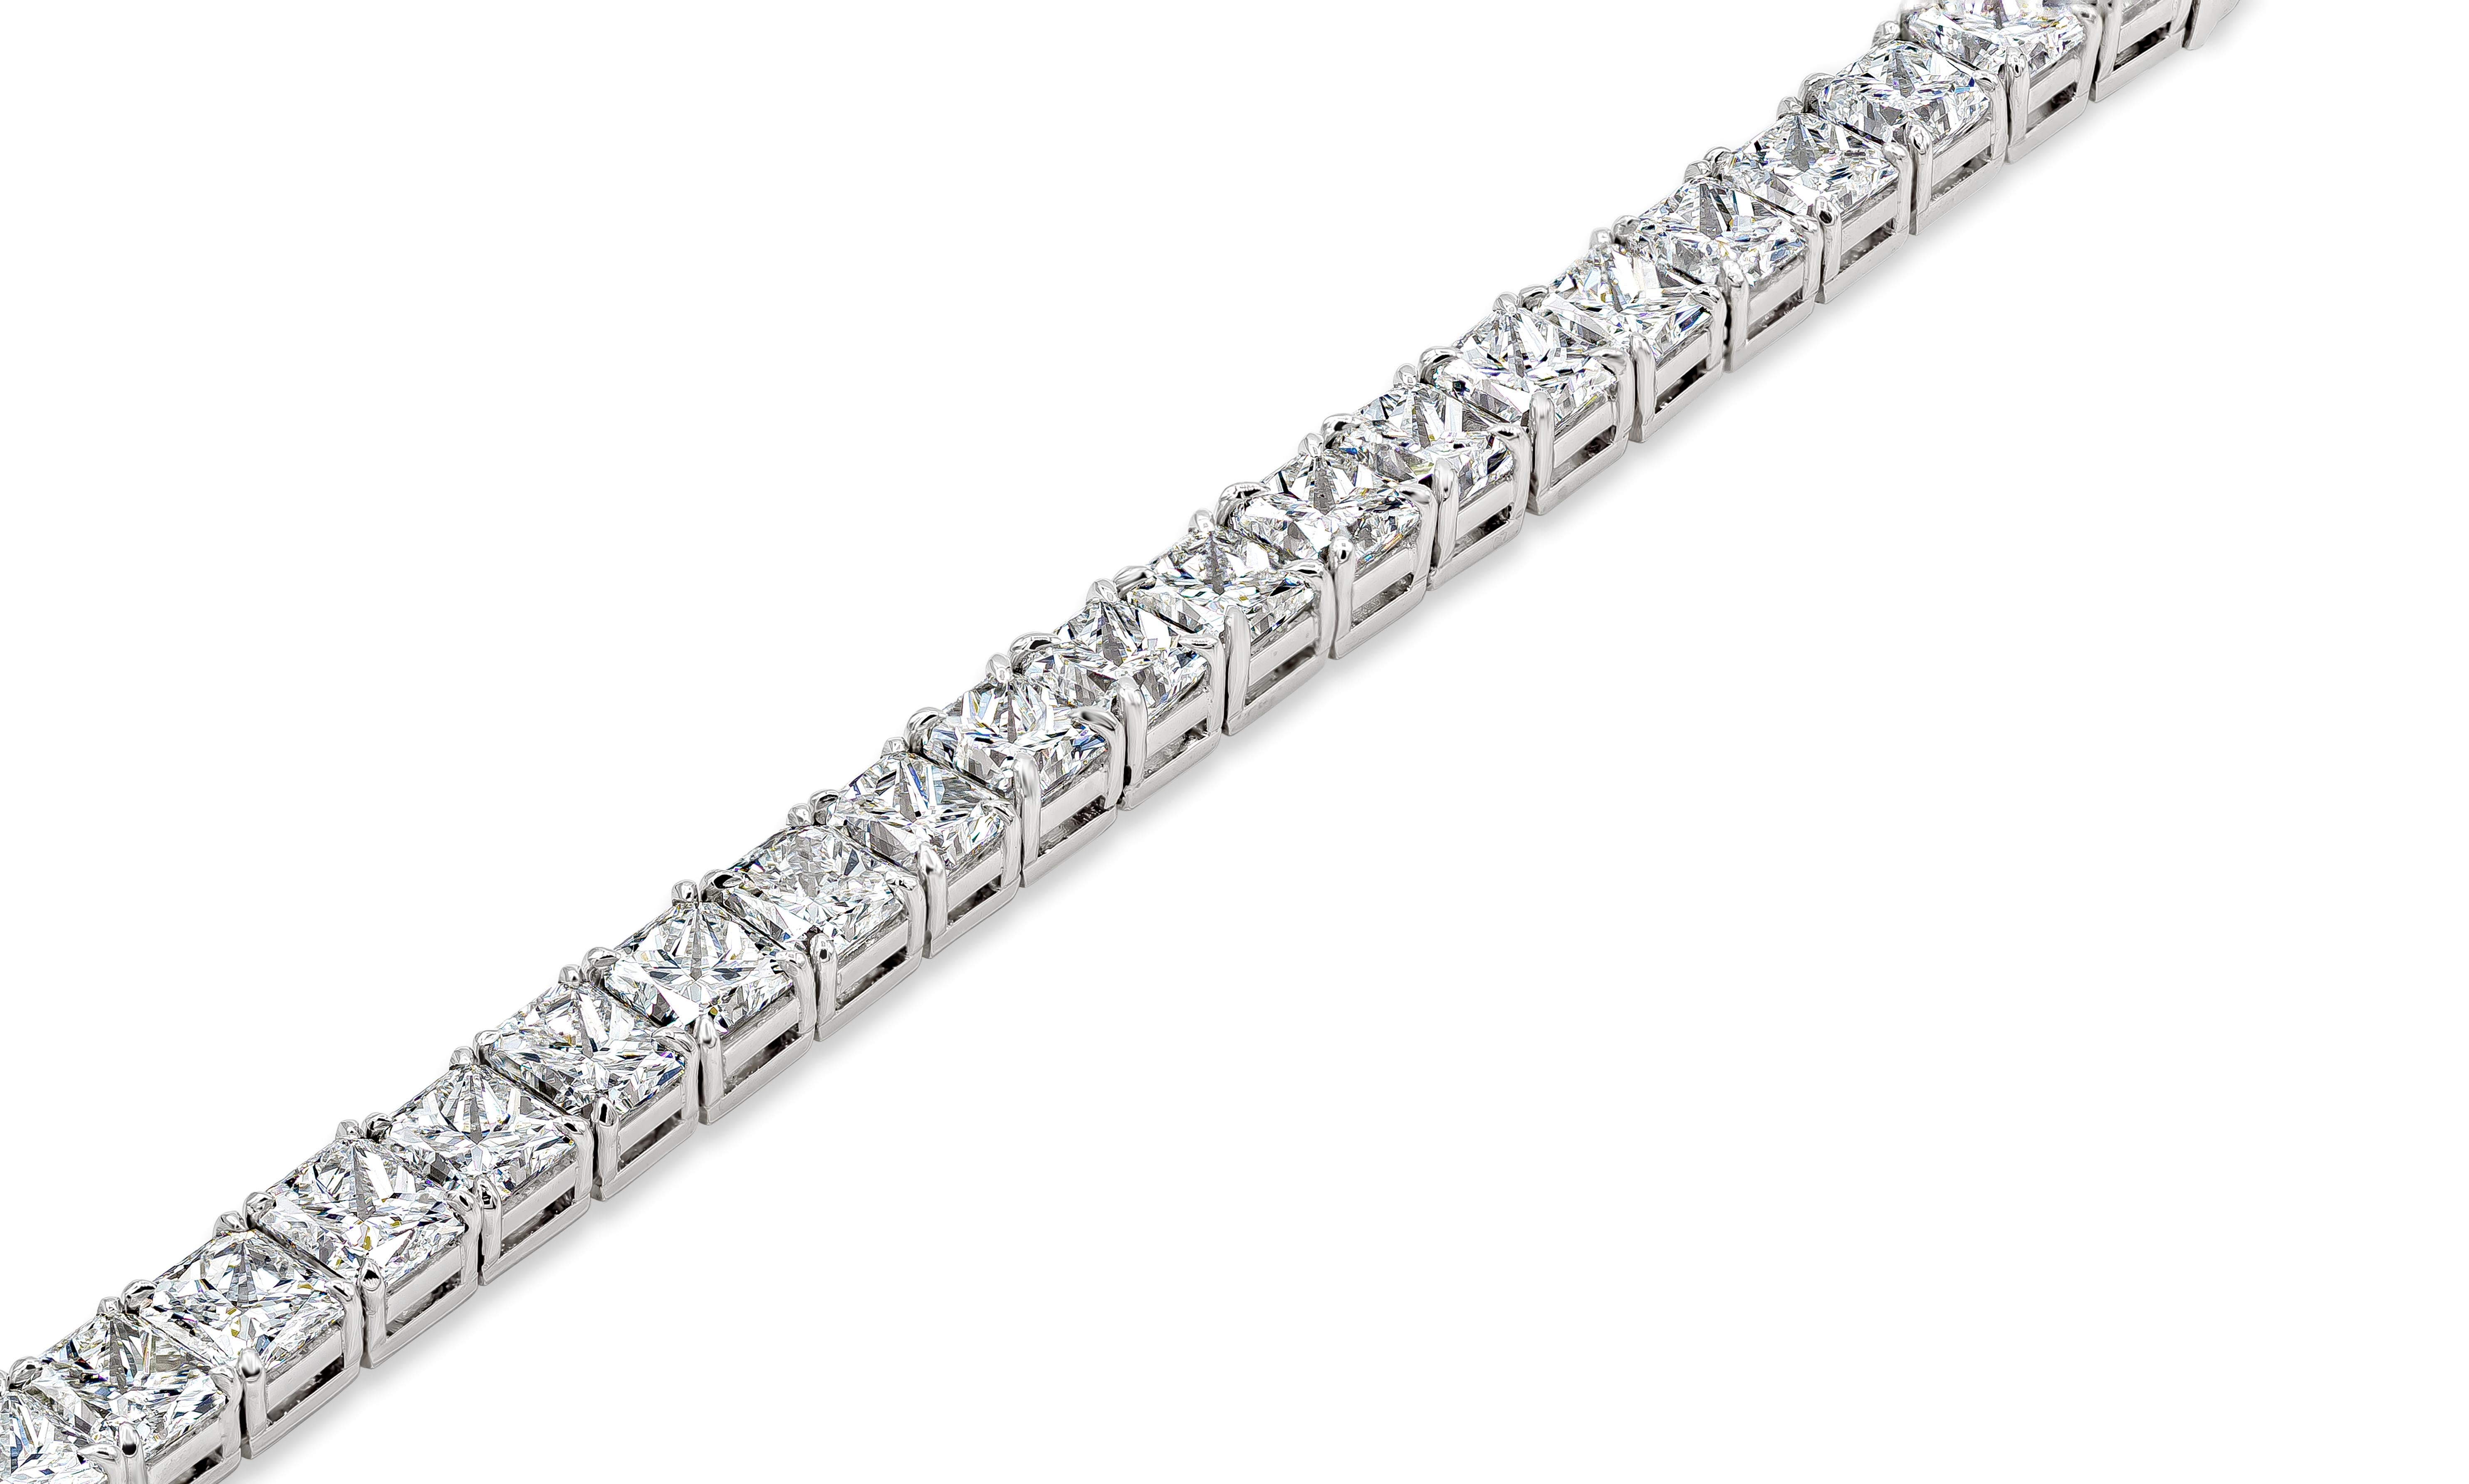 An important and brilliant tennis bracelet showcasing a row of 32 pieces of radiant cut diamonds weighing 31.36 carats total, set in a polished platinum mounting. Diamonds are approximately D-G color and SI in clarity. Perfect addition to anyone's